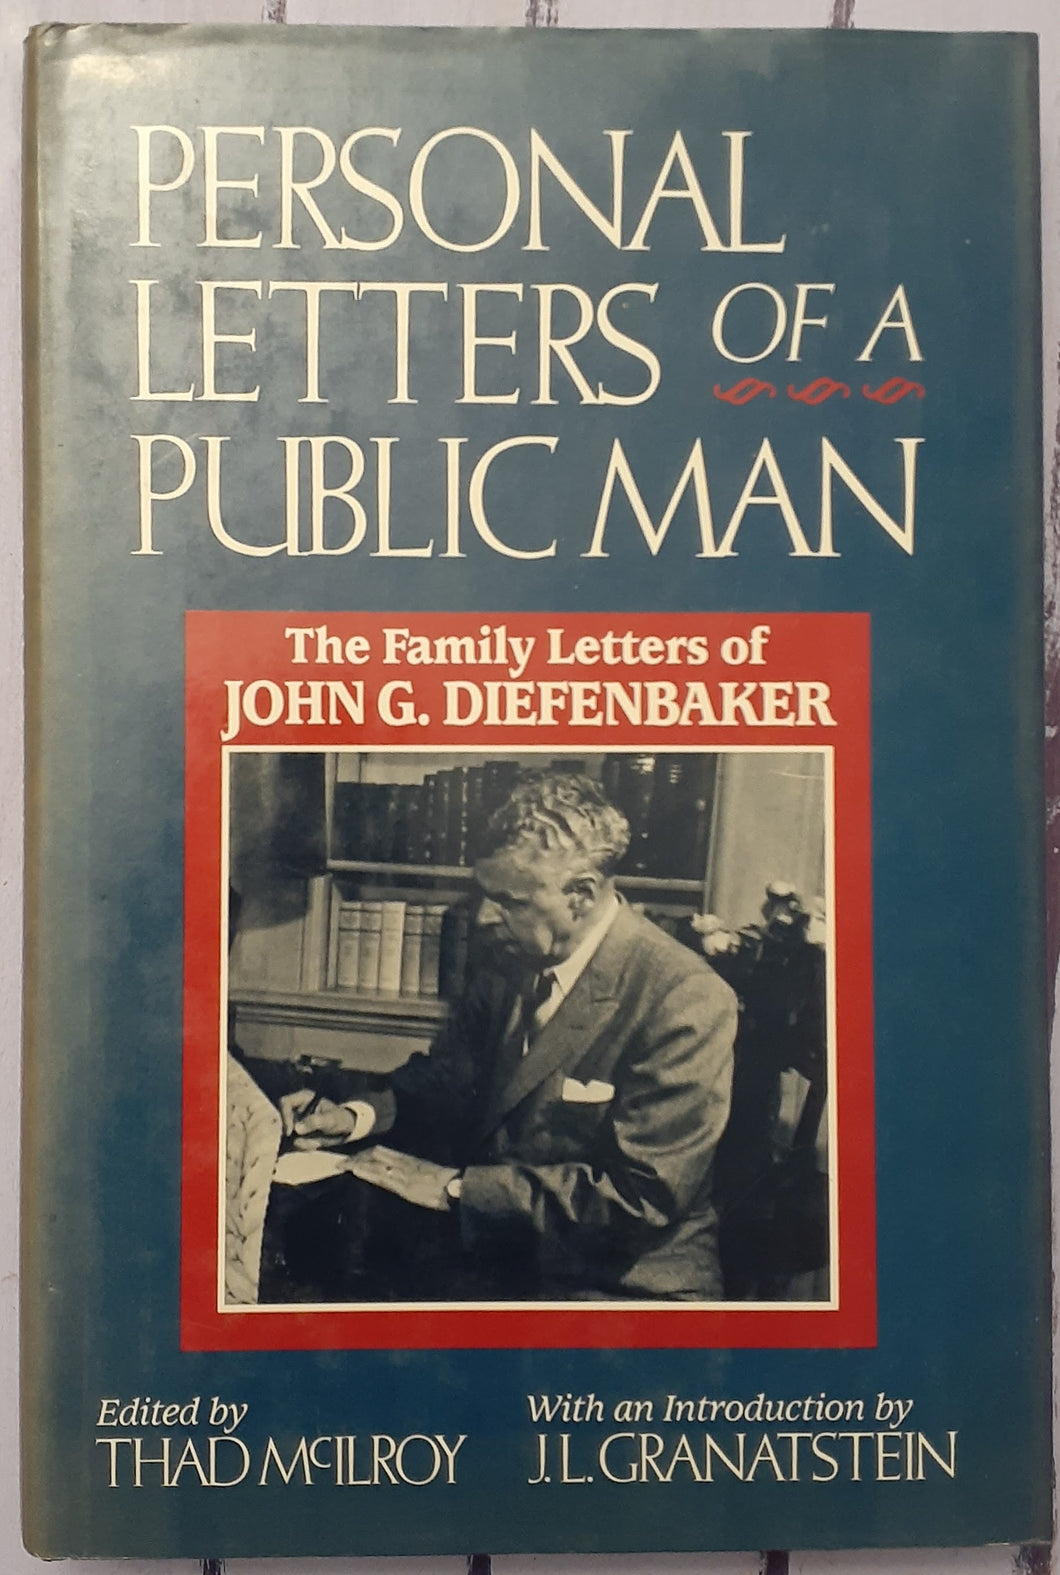 The Personal Letters of a Public Man: The Family Letters of John G. Diefenbaker